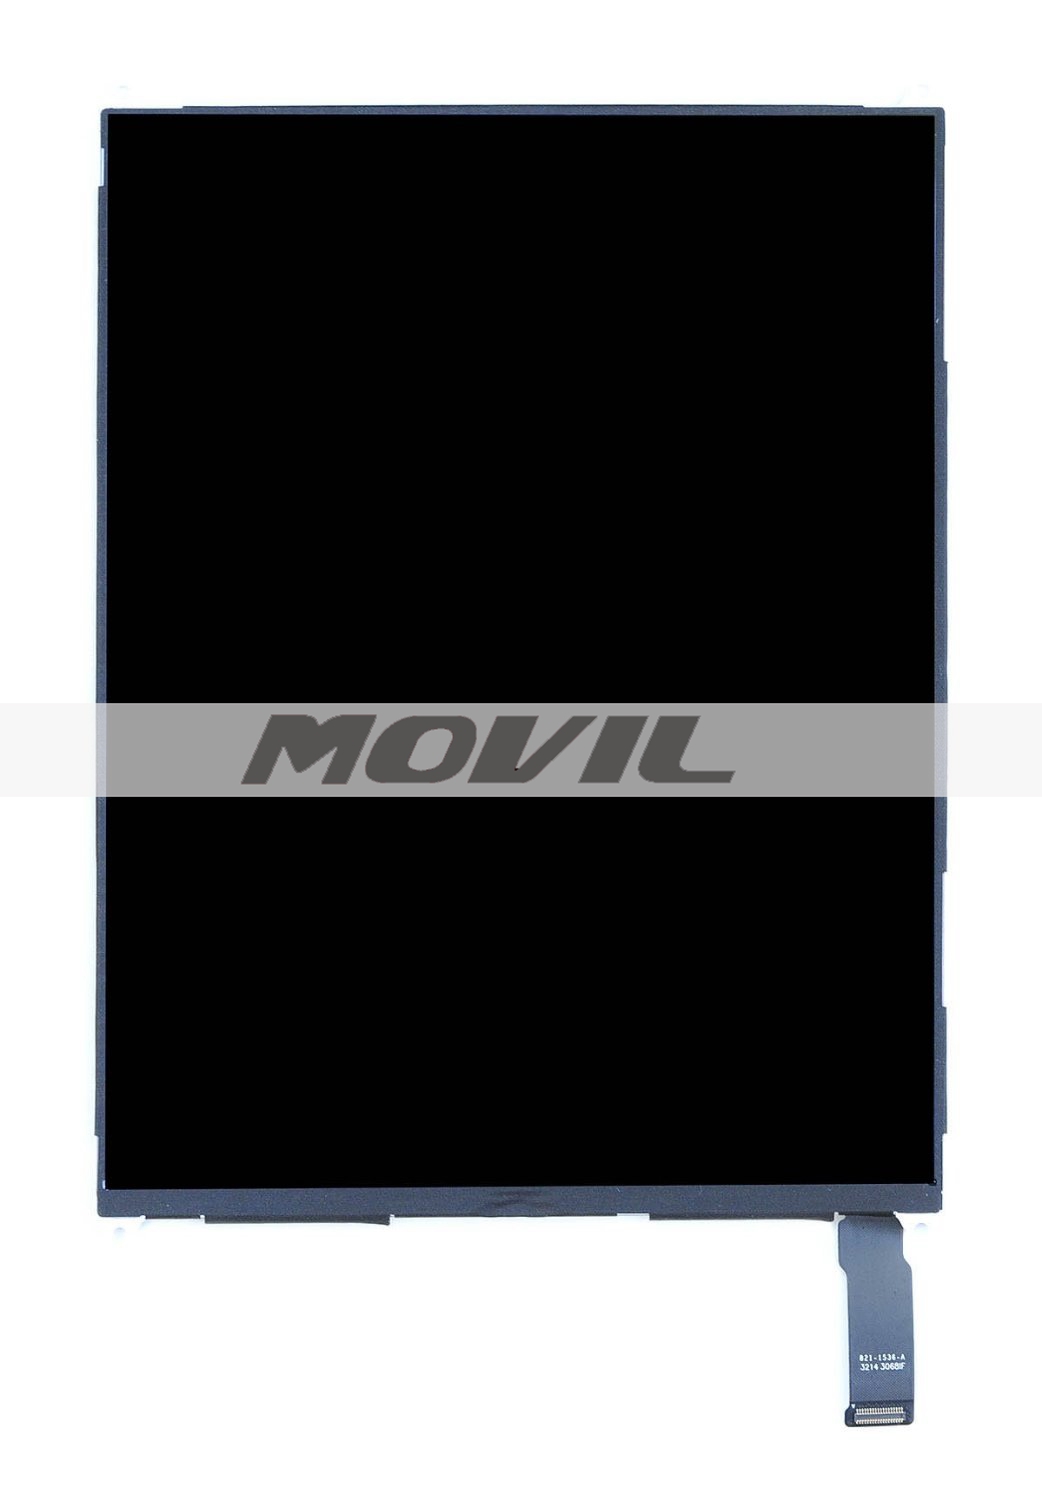 LCD Display Replacement for Apple iPad Mini Model A1432 A1454 and A1455